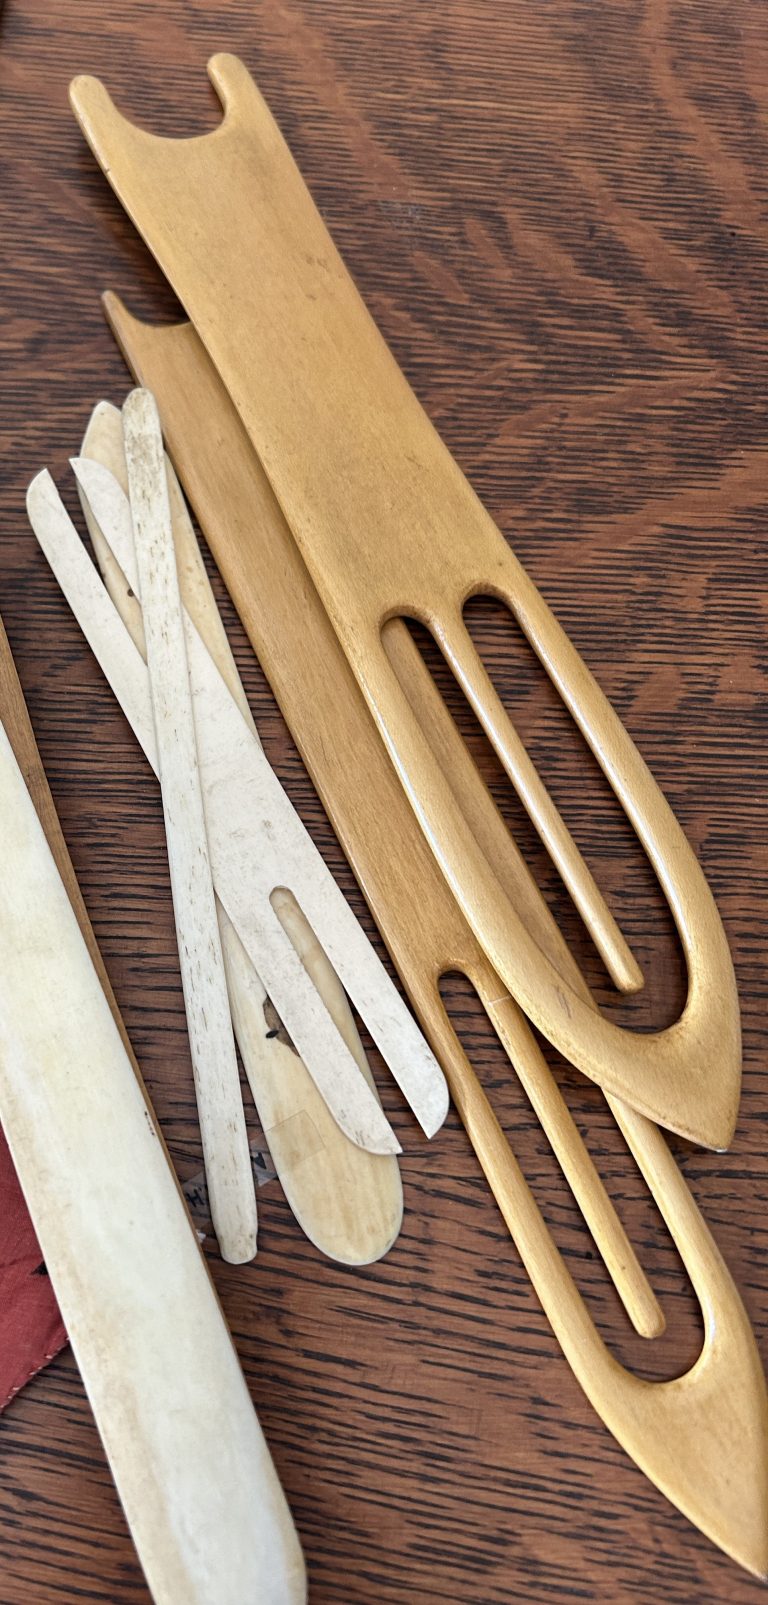 An image of long wooden tools with oval holes in the centre.